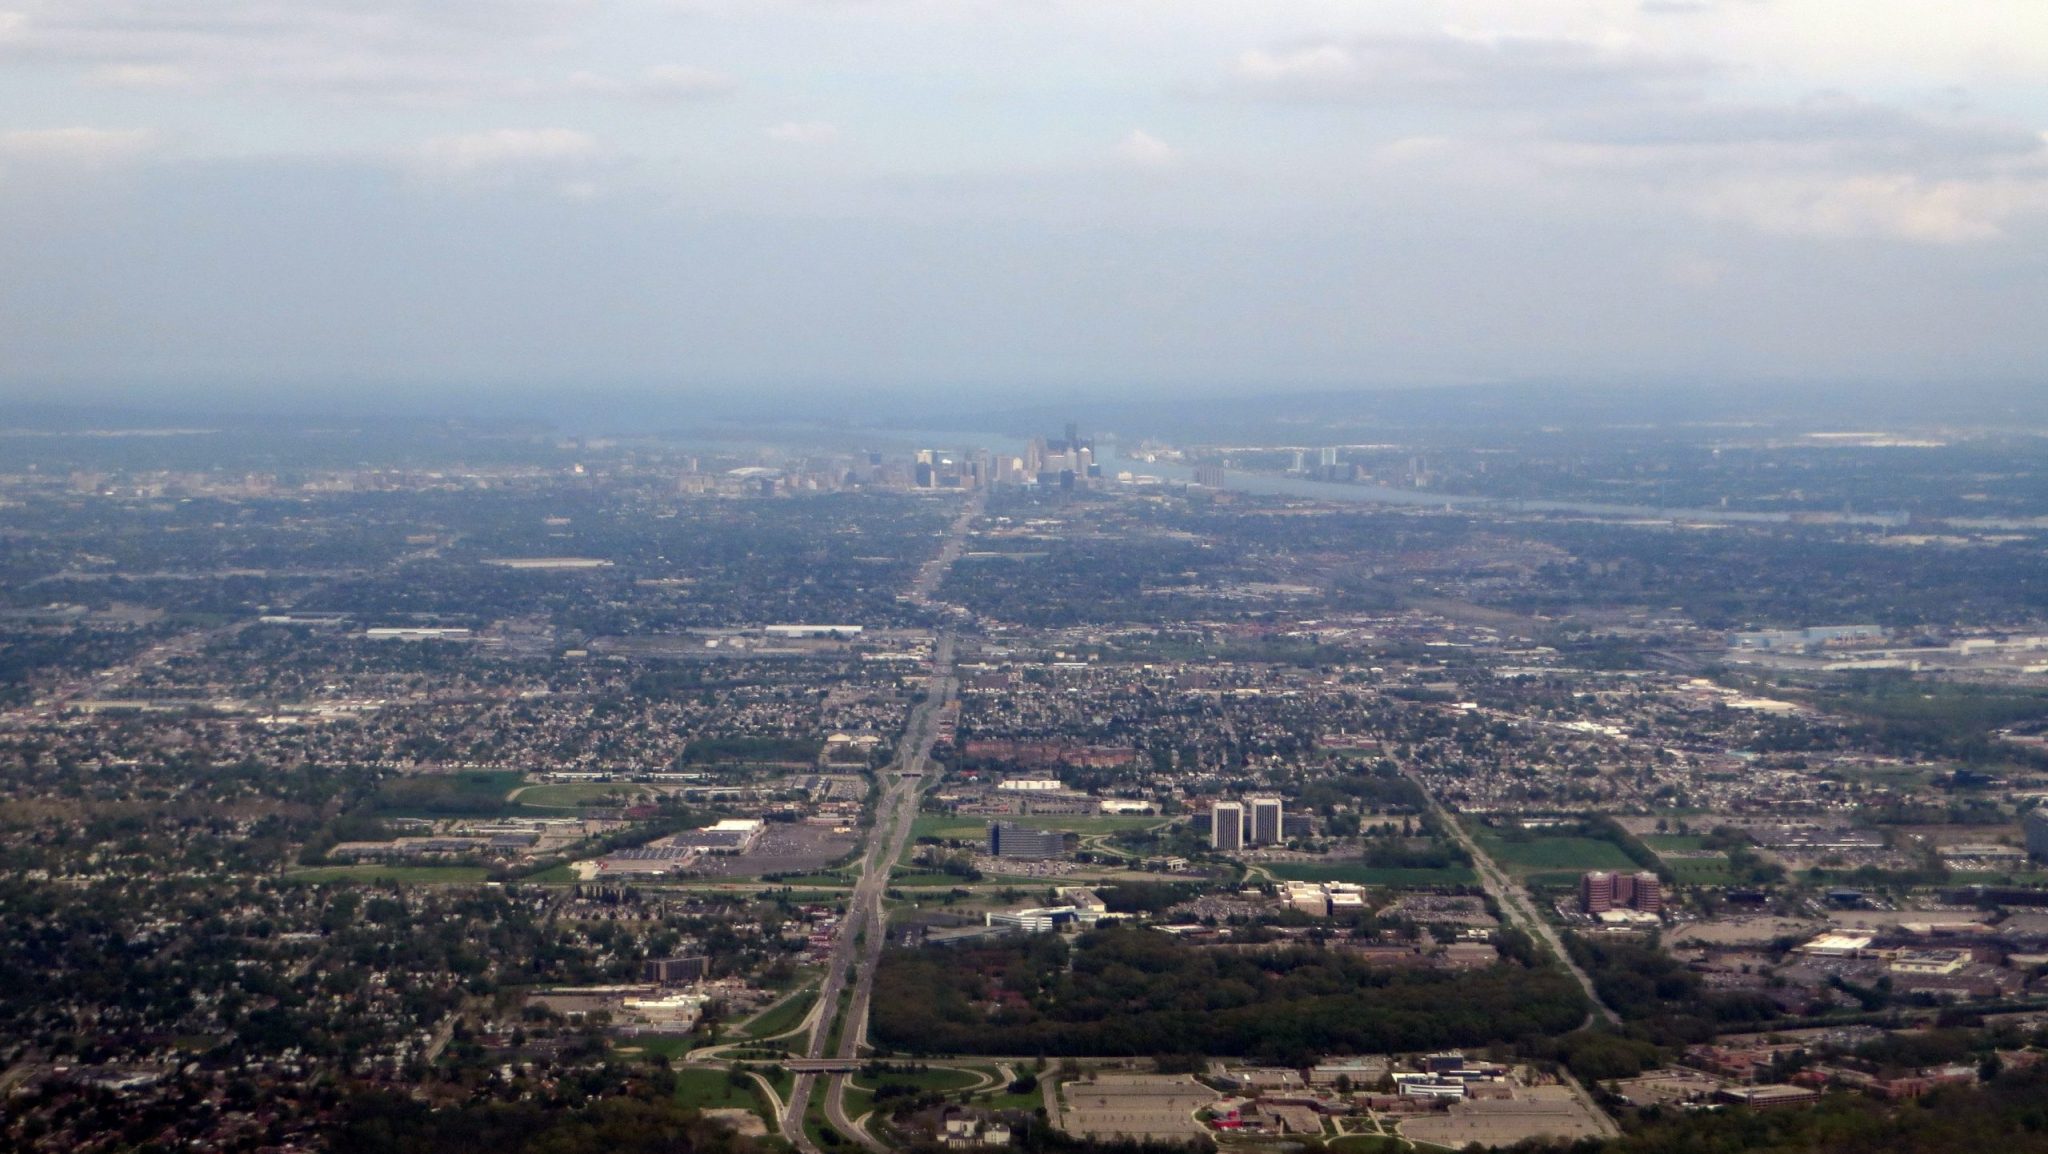 Aerial view of the Dearborn area.